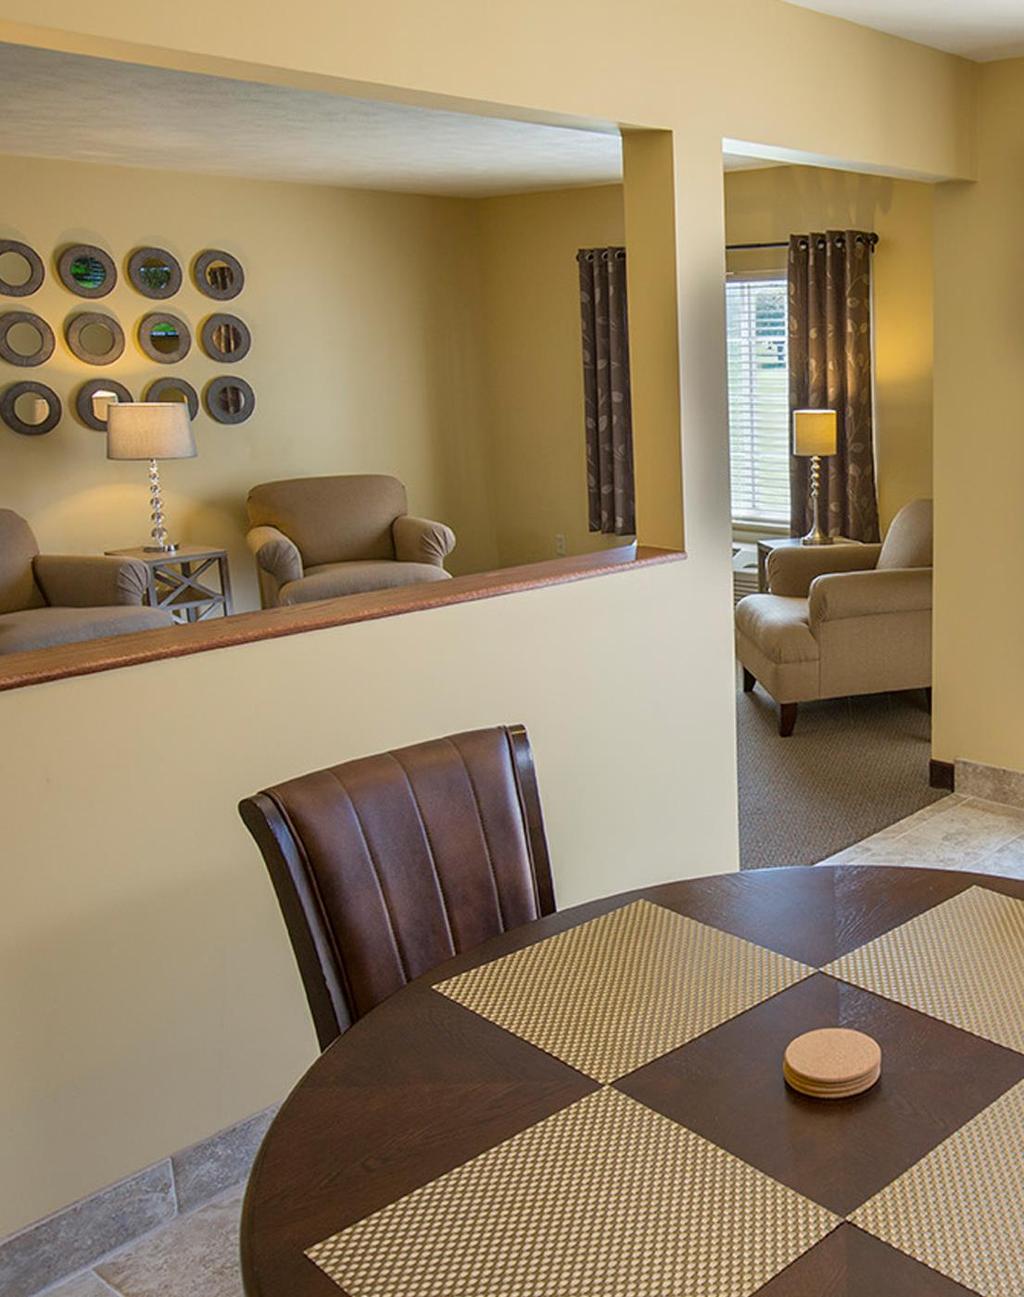 The suite also has a kitchenette with dining table and access to a private outdoor deck.